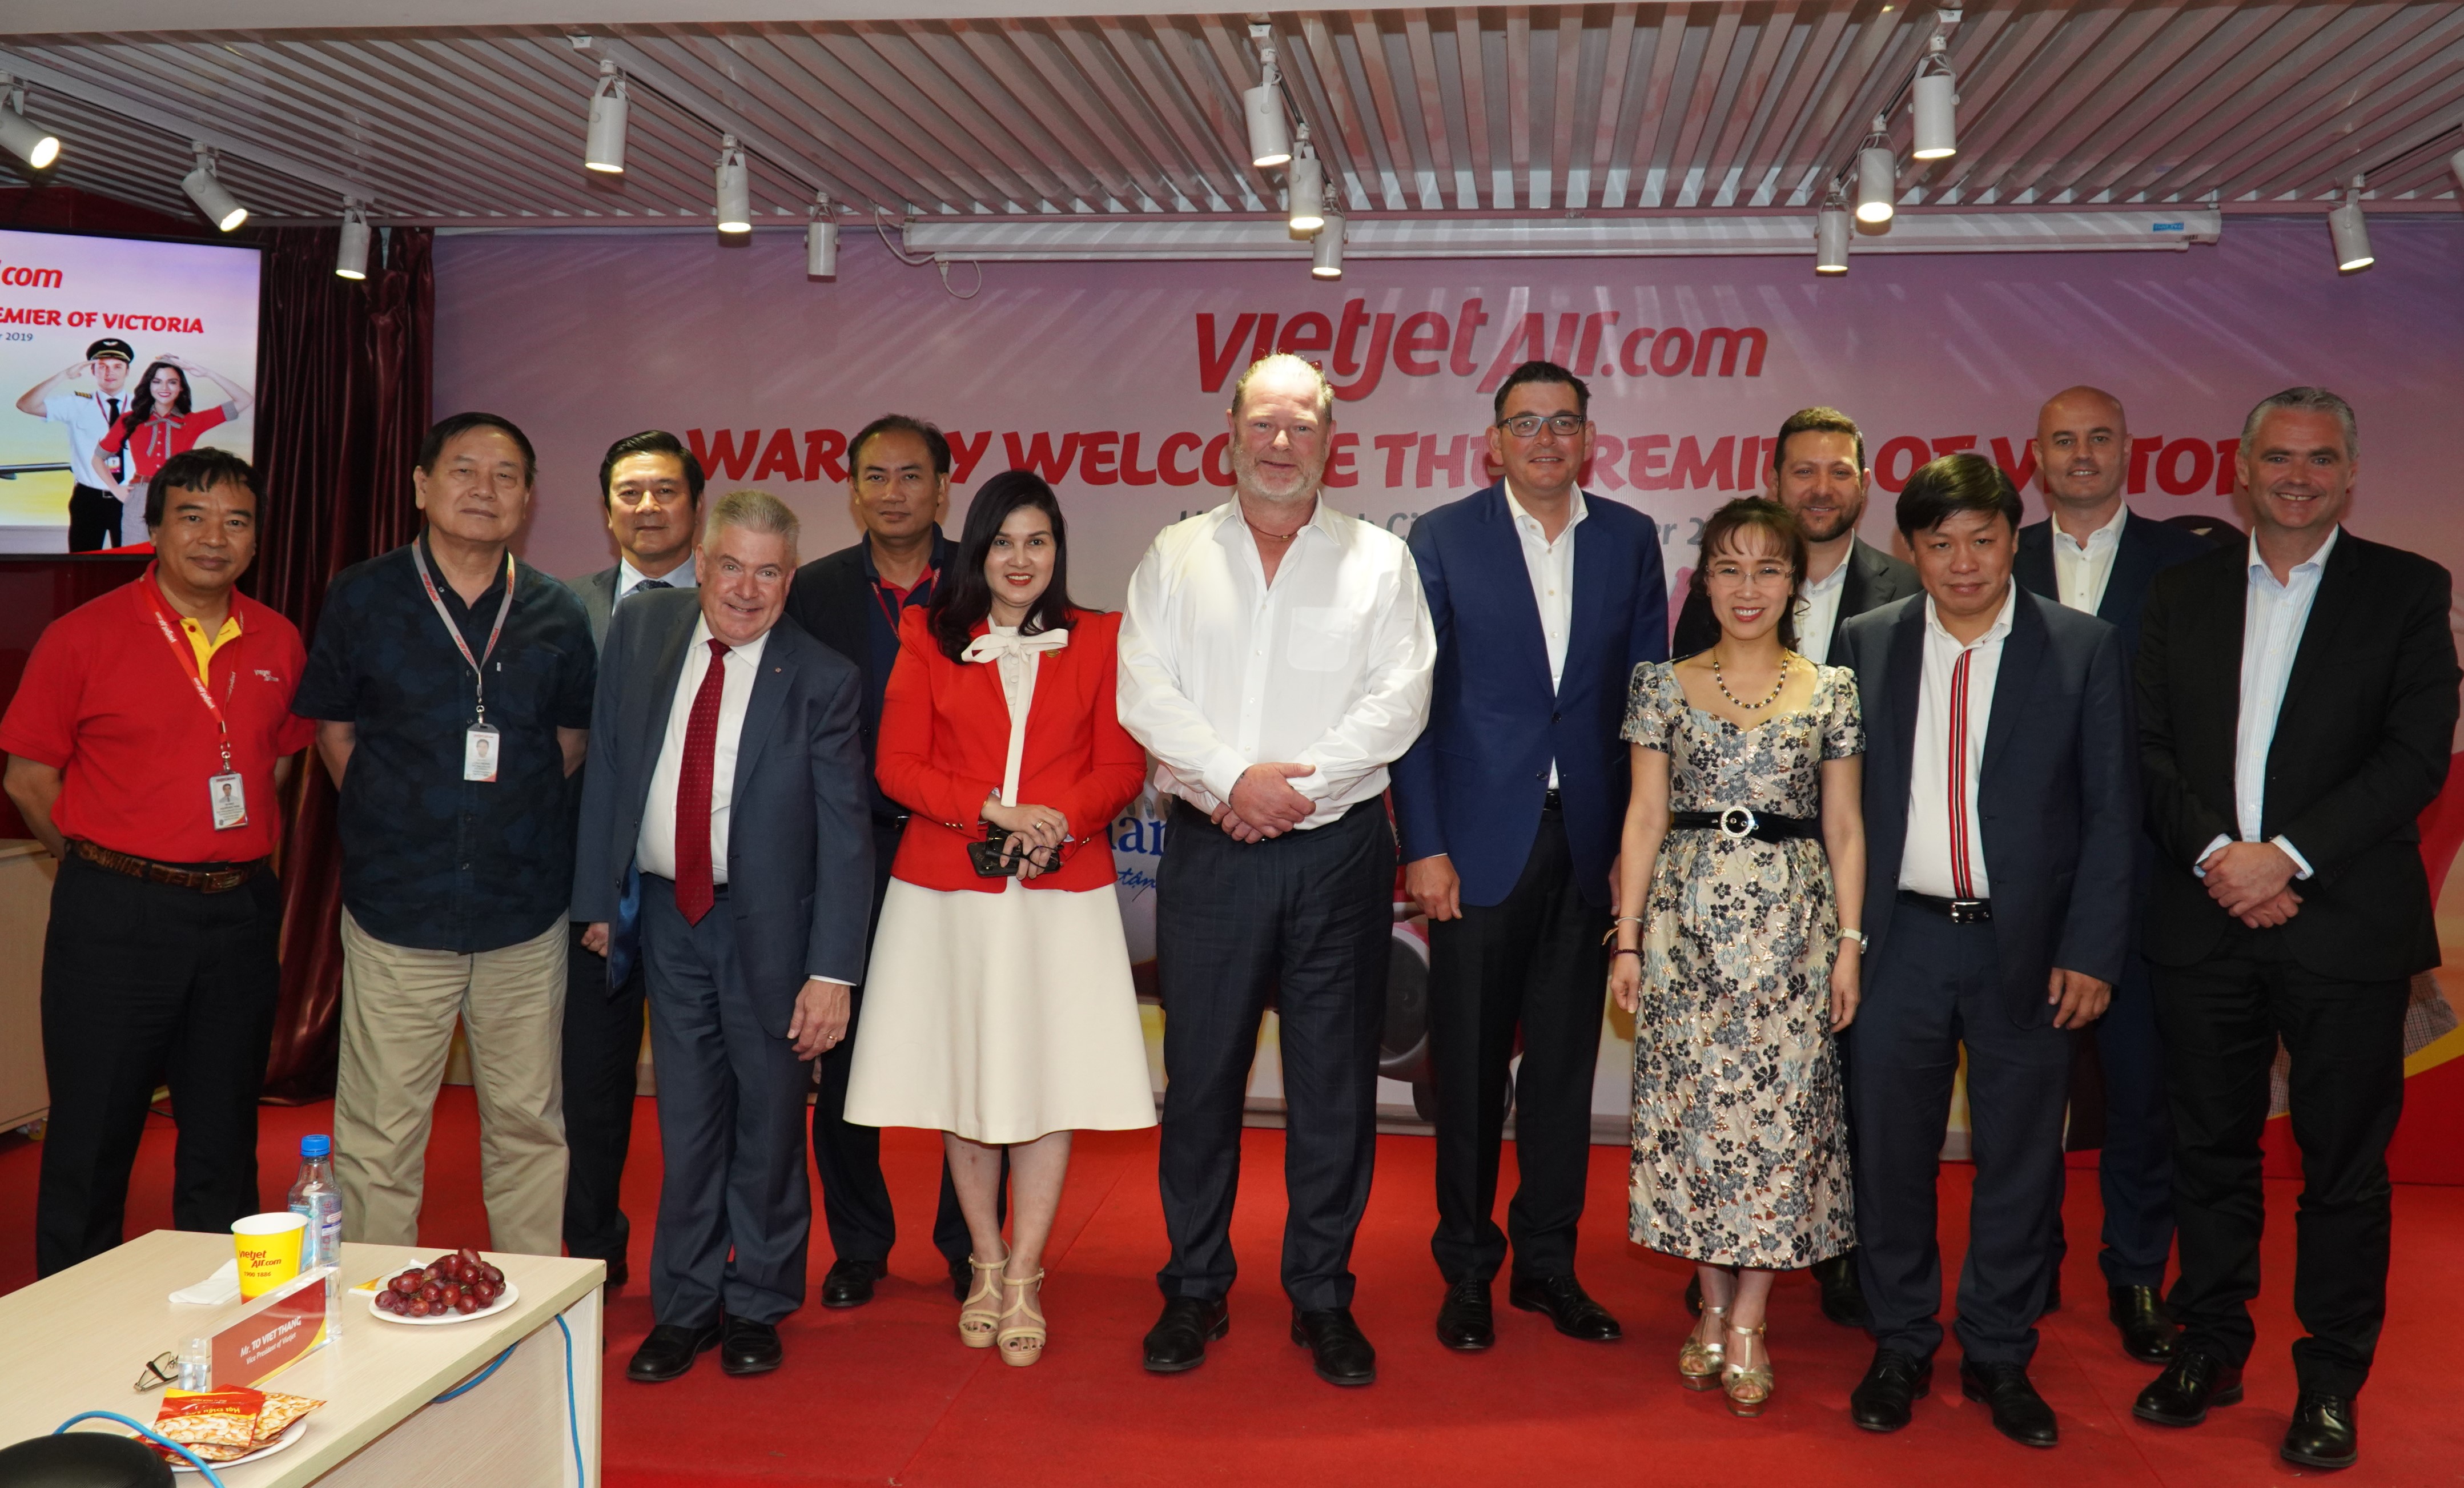 RMIT Vice-Chancellor and President Martin Bean CBE (4th from left) announced RMIT’s investment in a state-of-the-art flight simulator during an event at VietJet Air headquarters yesterday in the presence of Victorian Premier, the Hon. Daniel Andrews MP (6th from right), and VietJet President and CEO Nguyen Thi Phuong Thao (5th from right).  